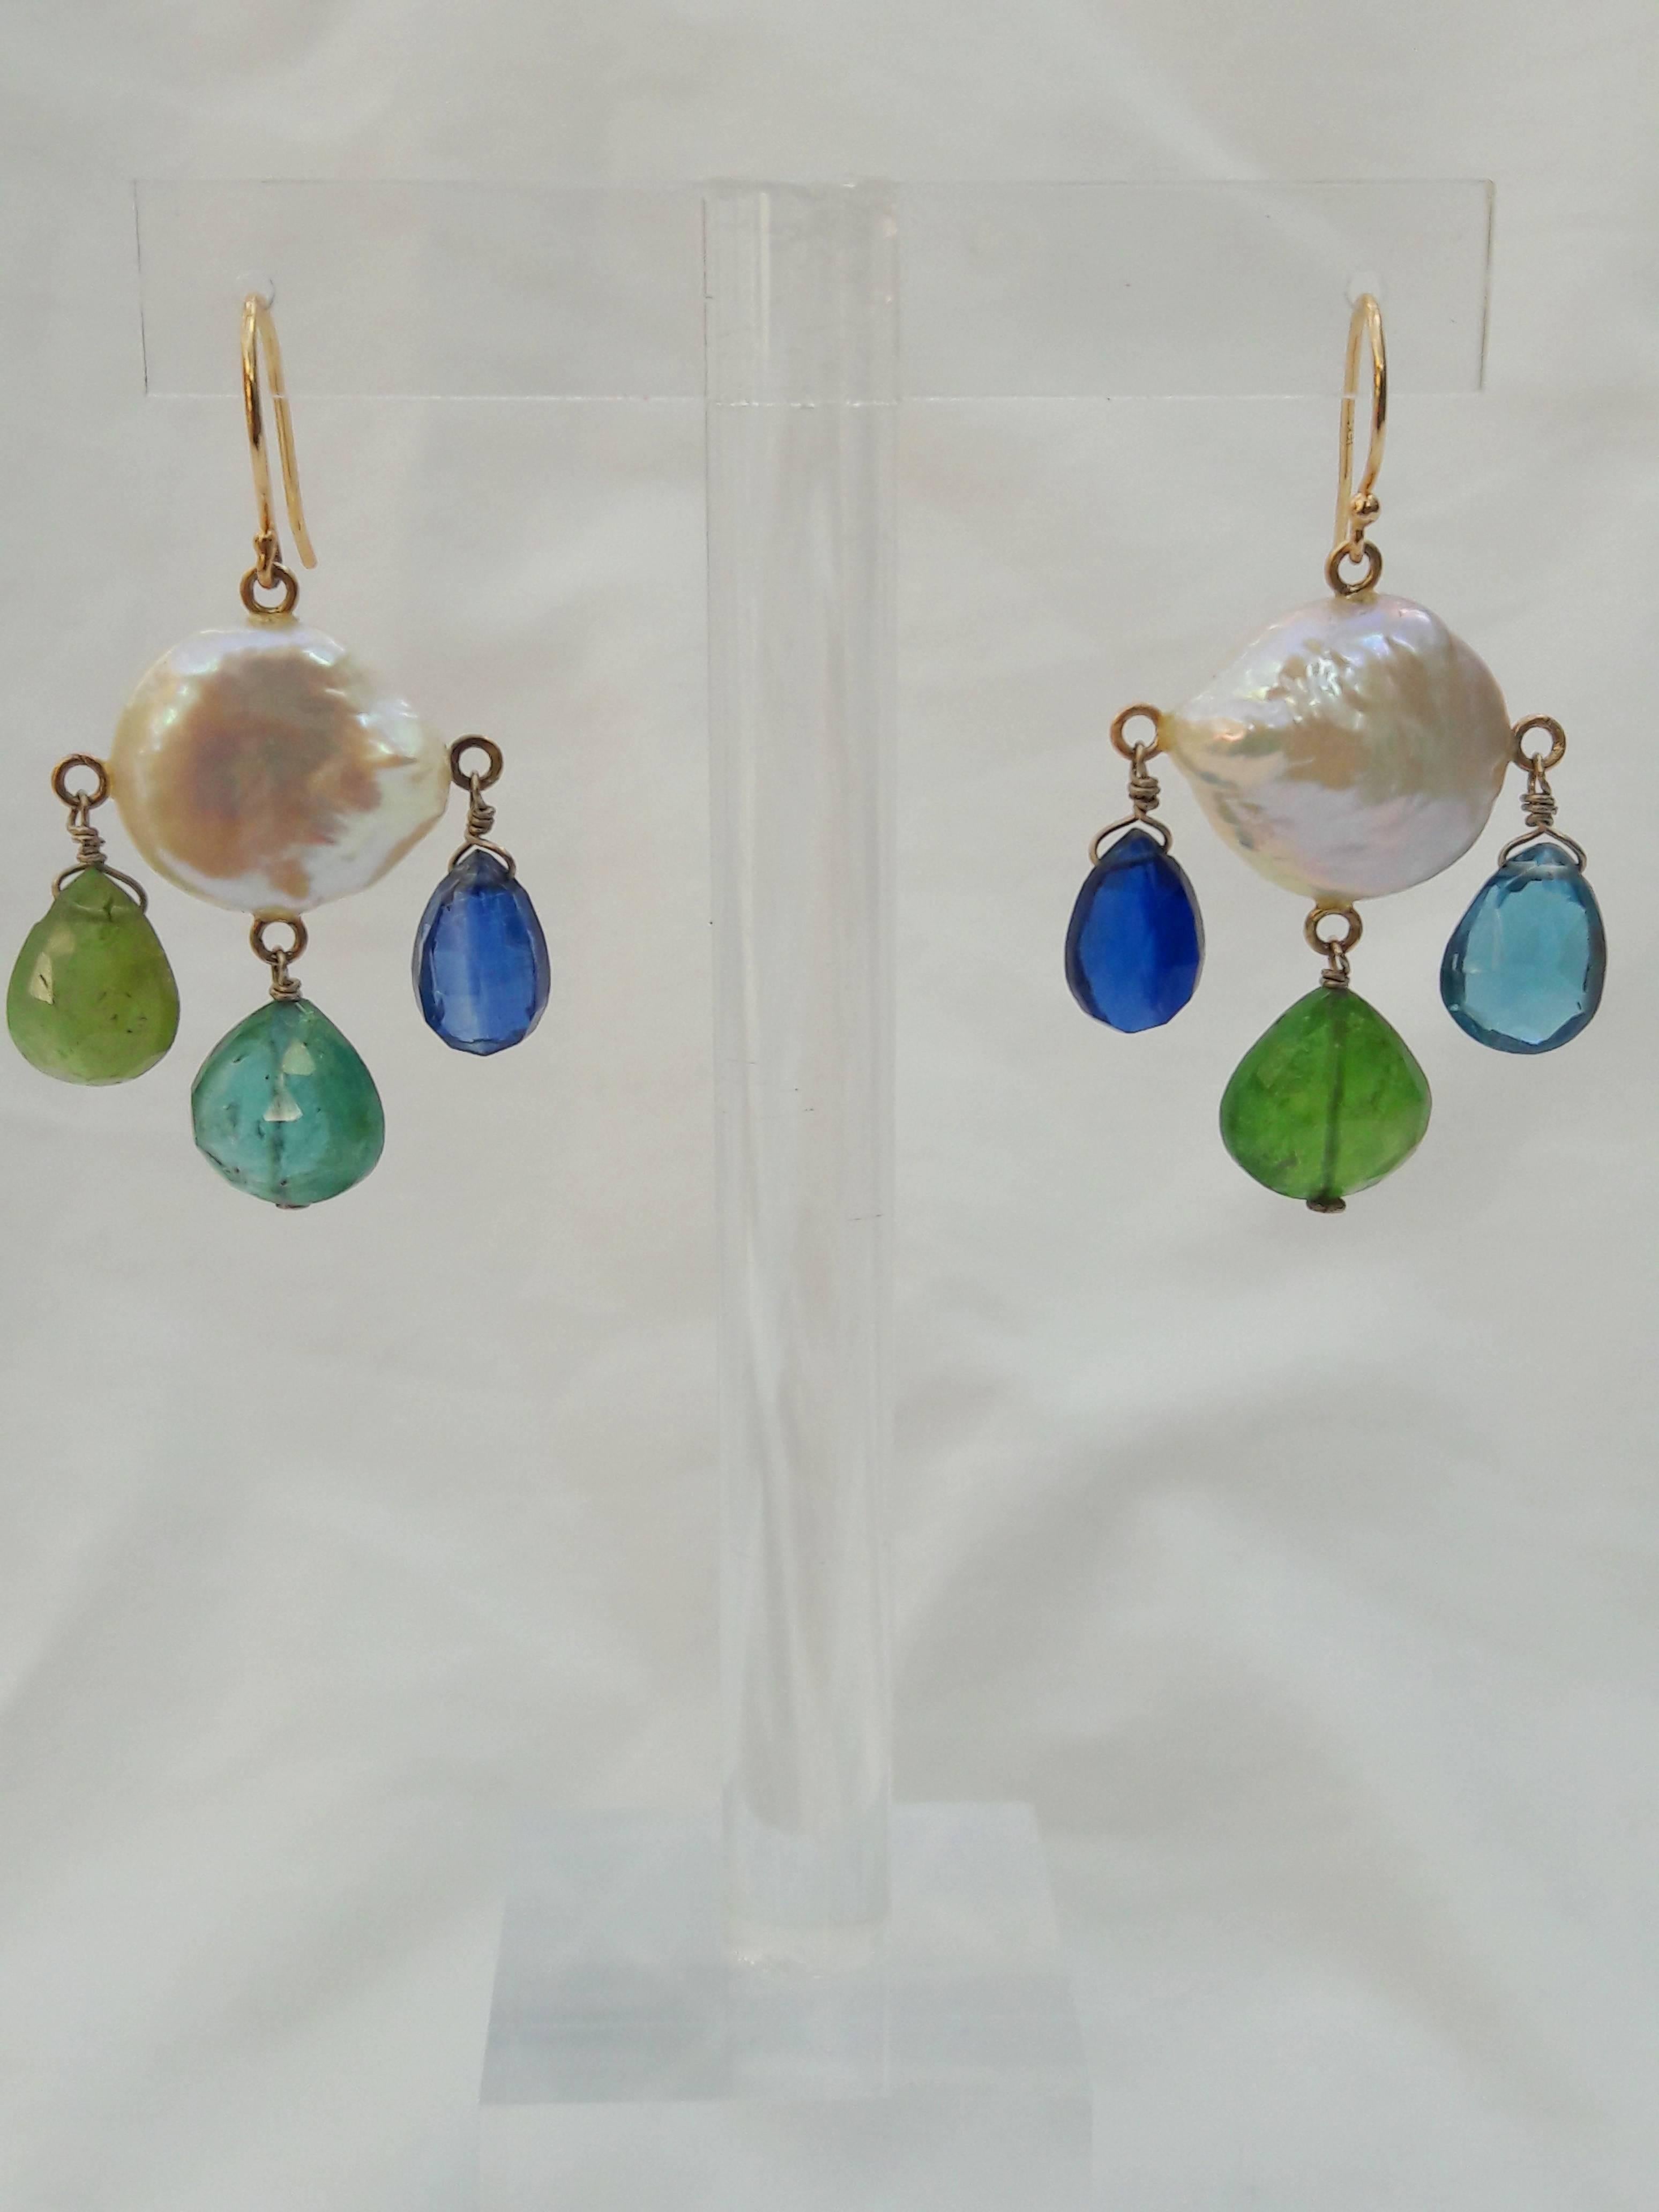 Beautiful pair of multi colored Chandelier earrings by Marina J. This pair is made using all solid 14k Yellow Gold wiring and organic stones. Two large flat coin Pearls with wild iridescence and sheen are used in this pair. One earrings displays